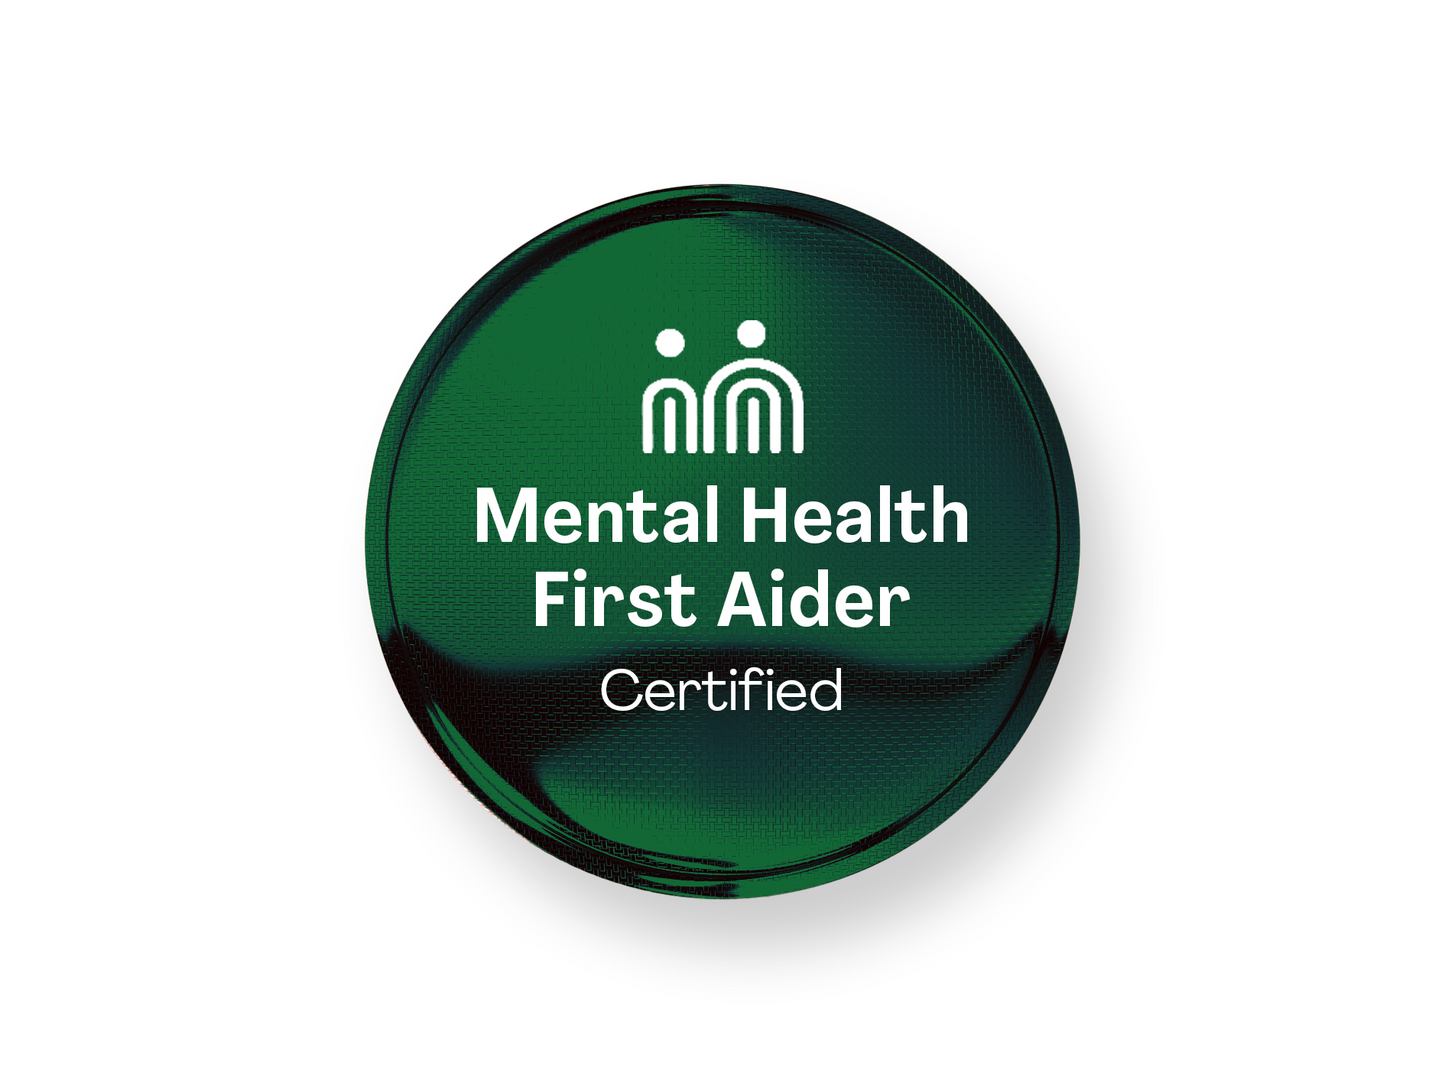 MHFAider Certified Badge